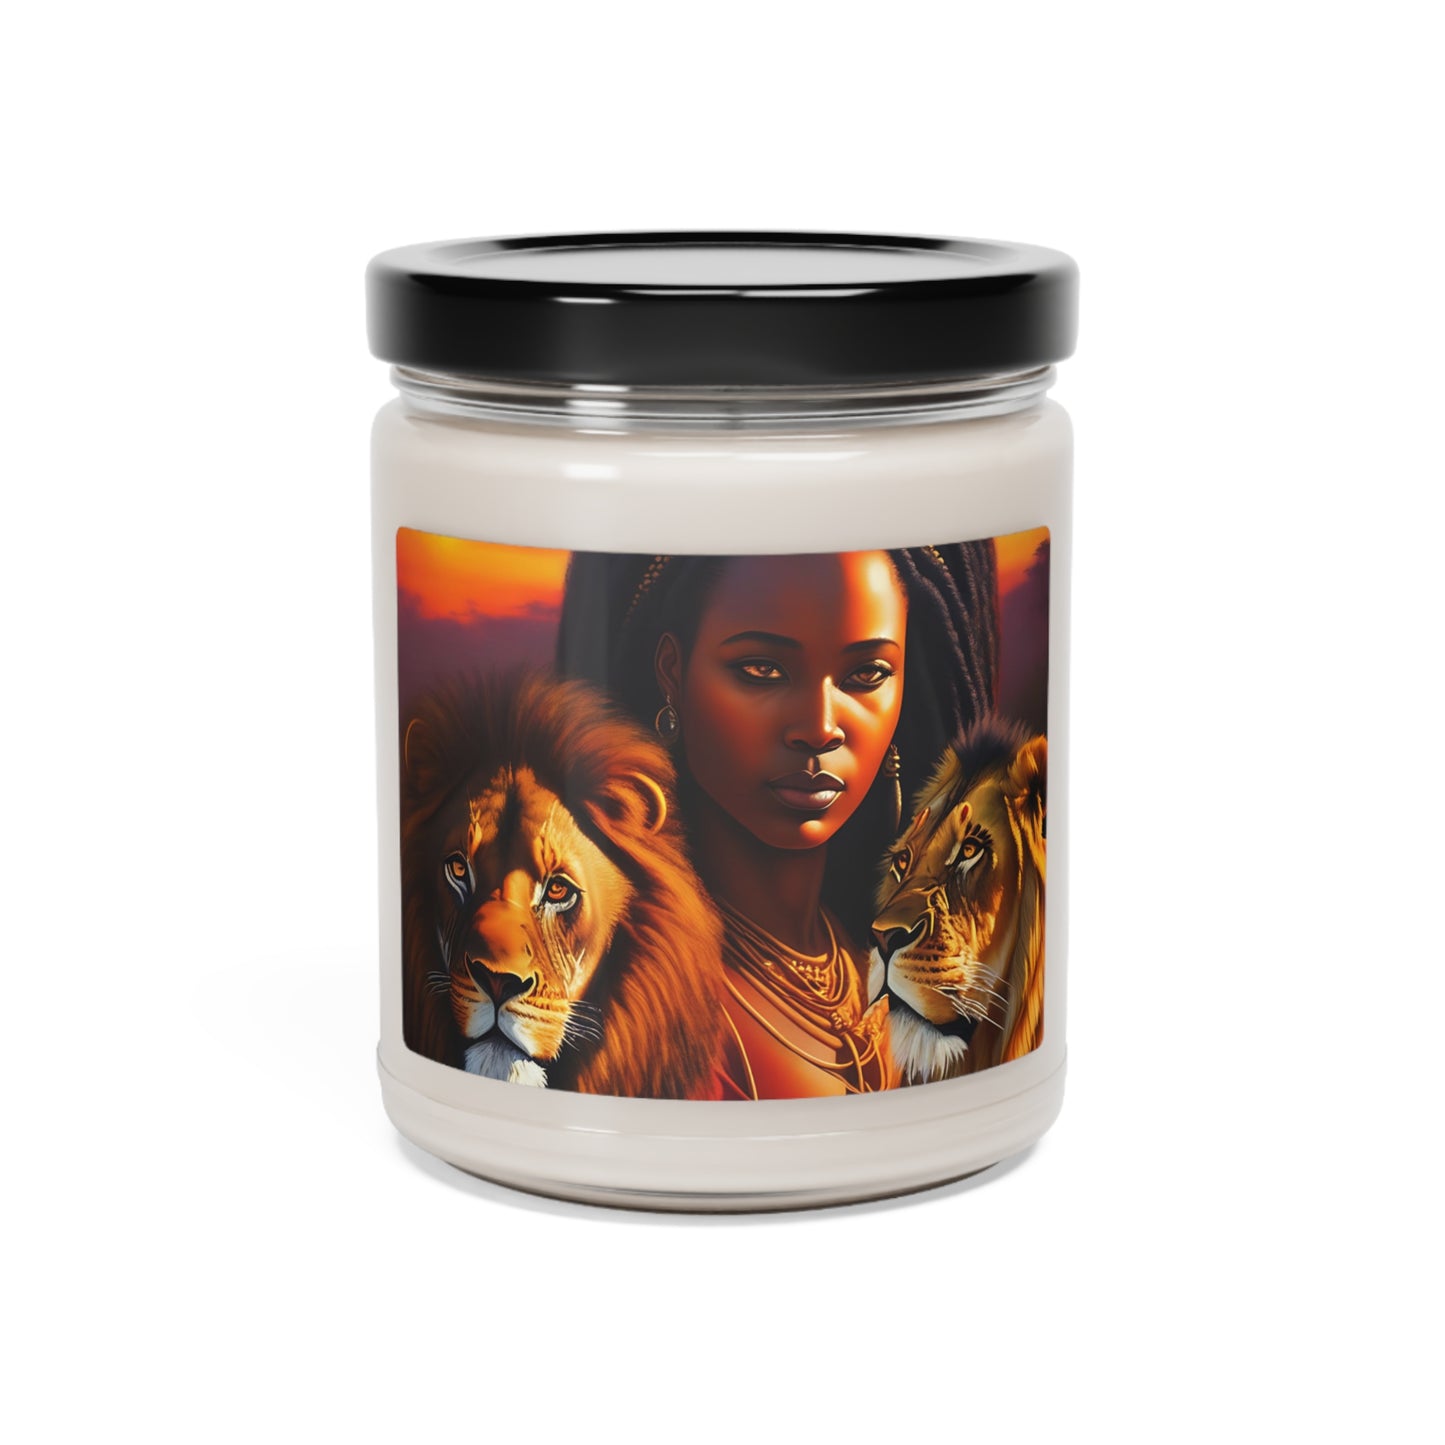 Lioness Scented Soy Candle, 9oz